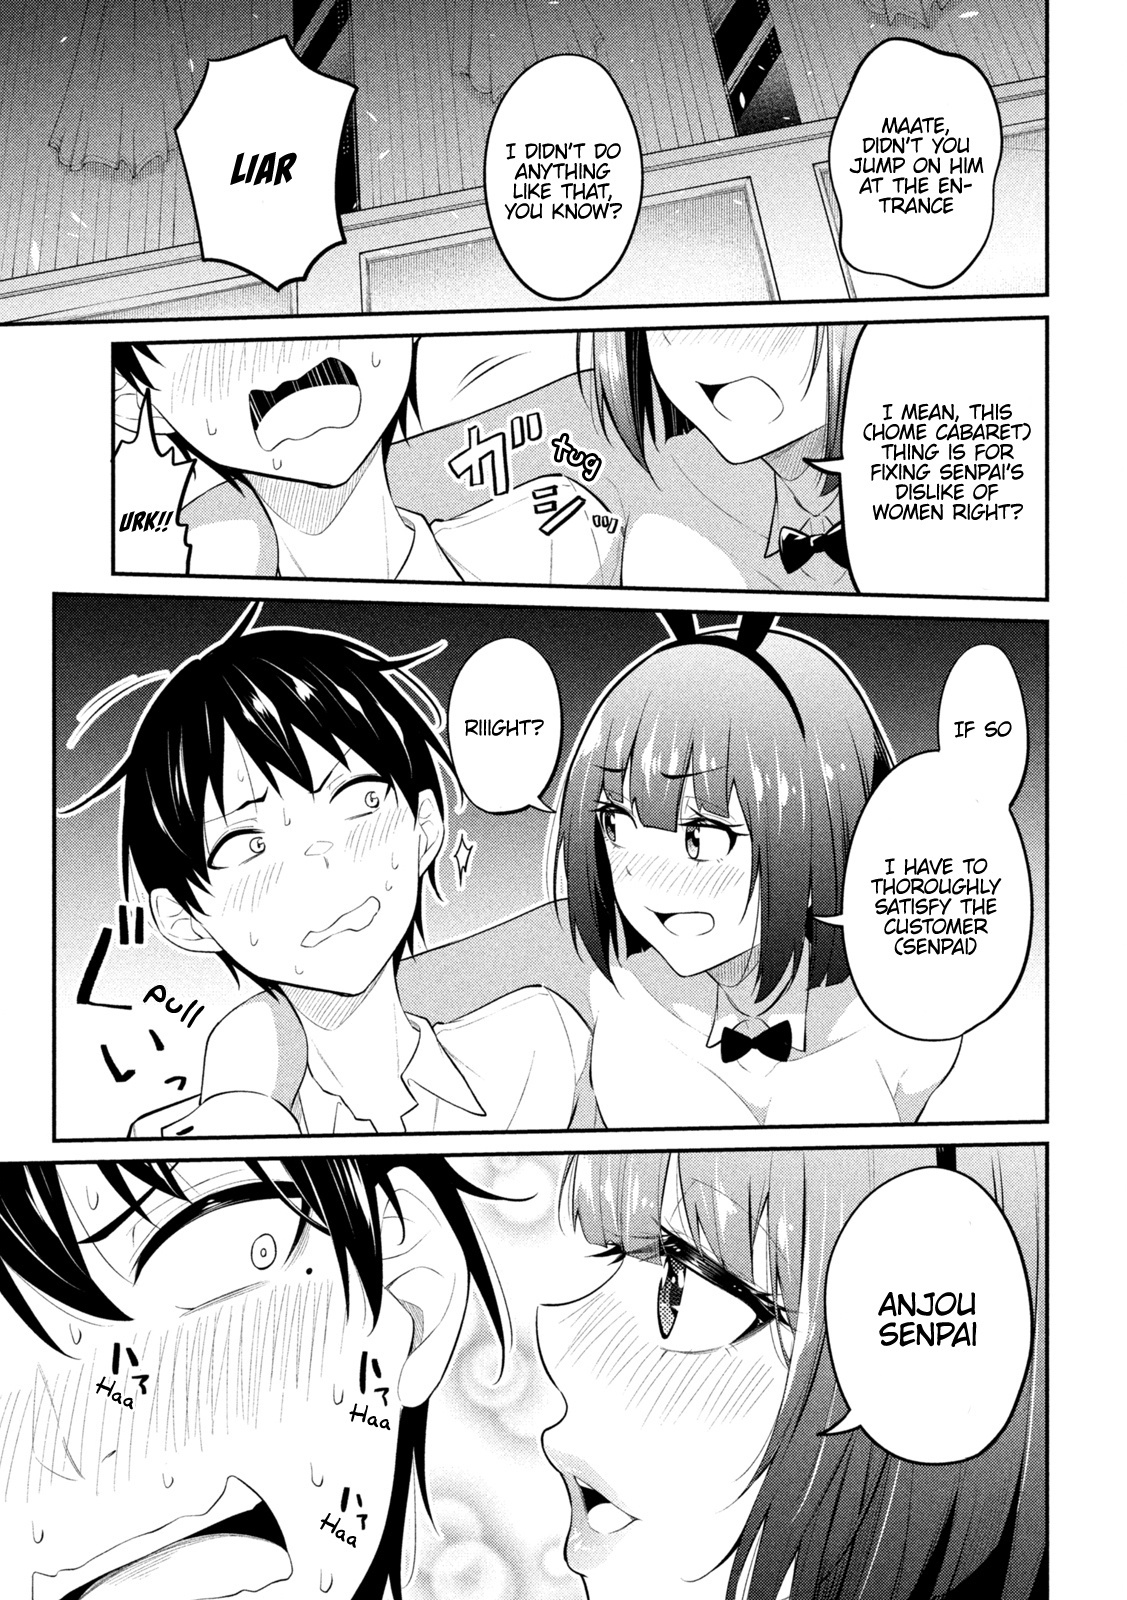 Home Cabaret ~Operation: Making A Cabaret Club At Home So Nii-Chan Can Get Used To Girls~ Chapter 6 #10